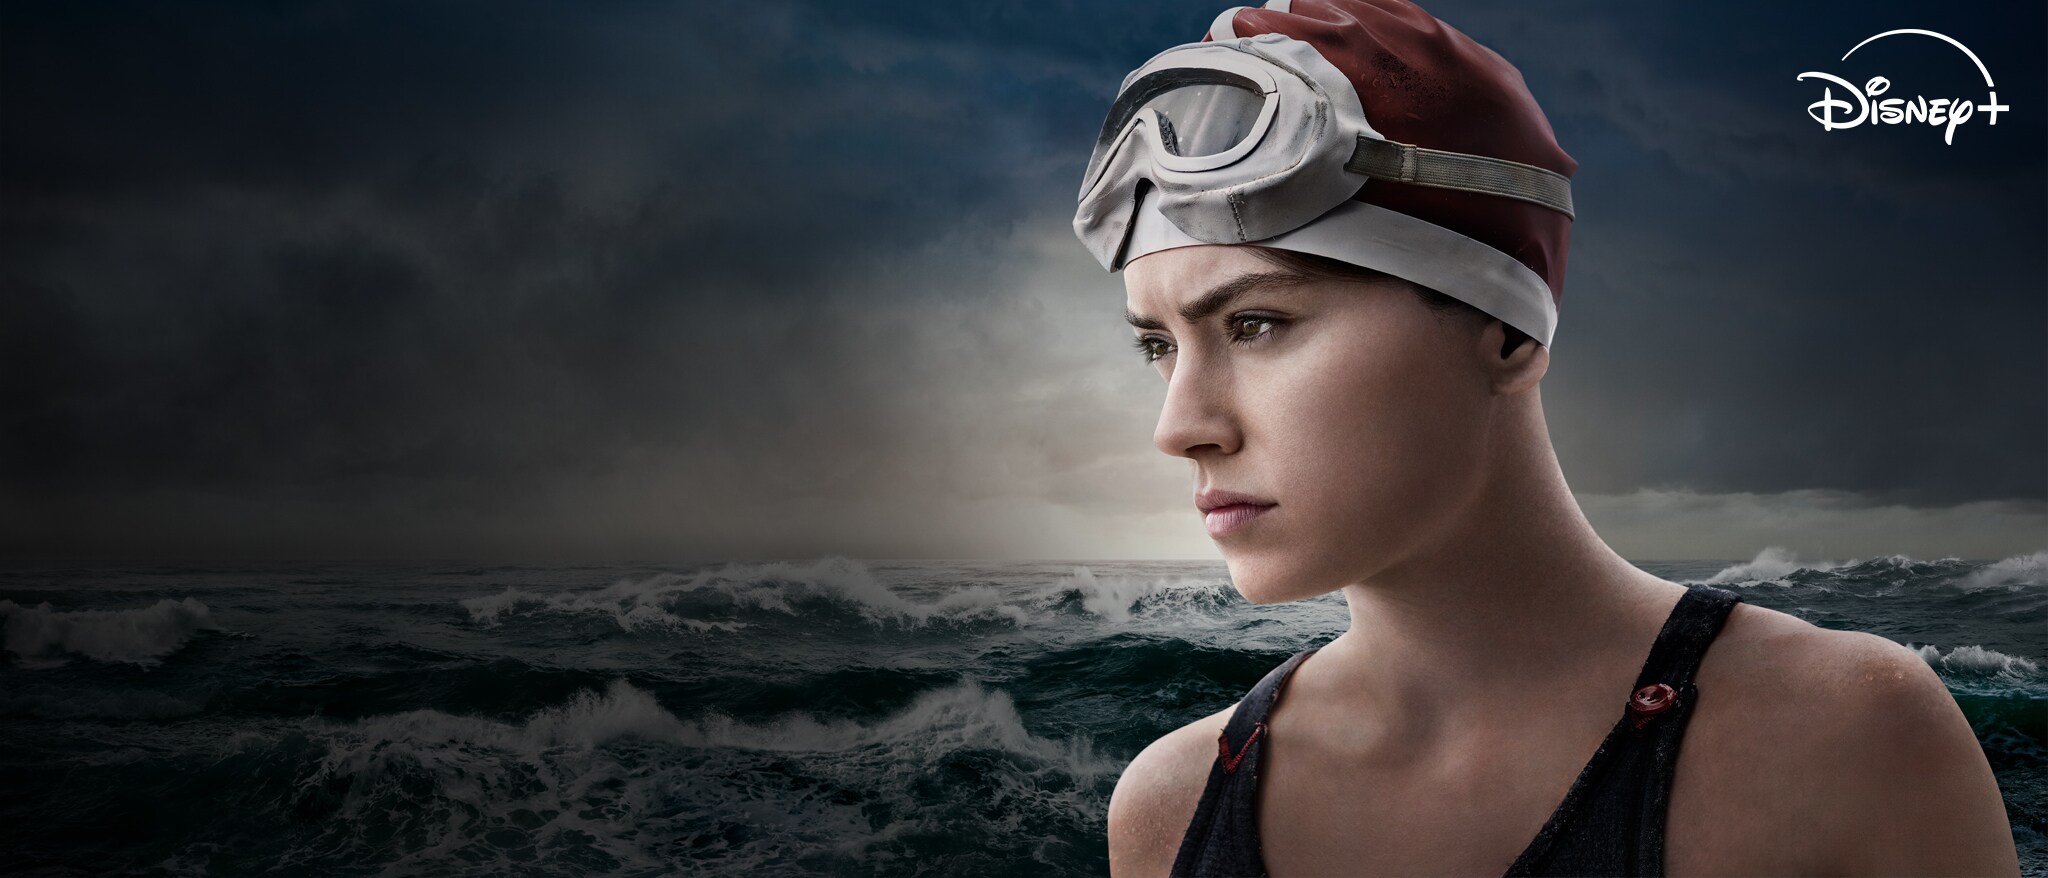 Hero - Disney+ - Young Woman and the Sea Now Streaming